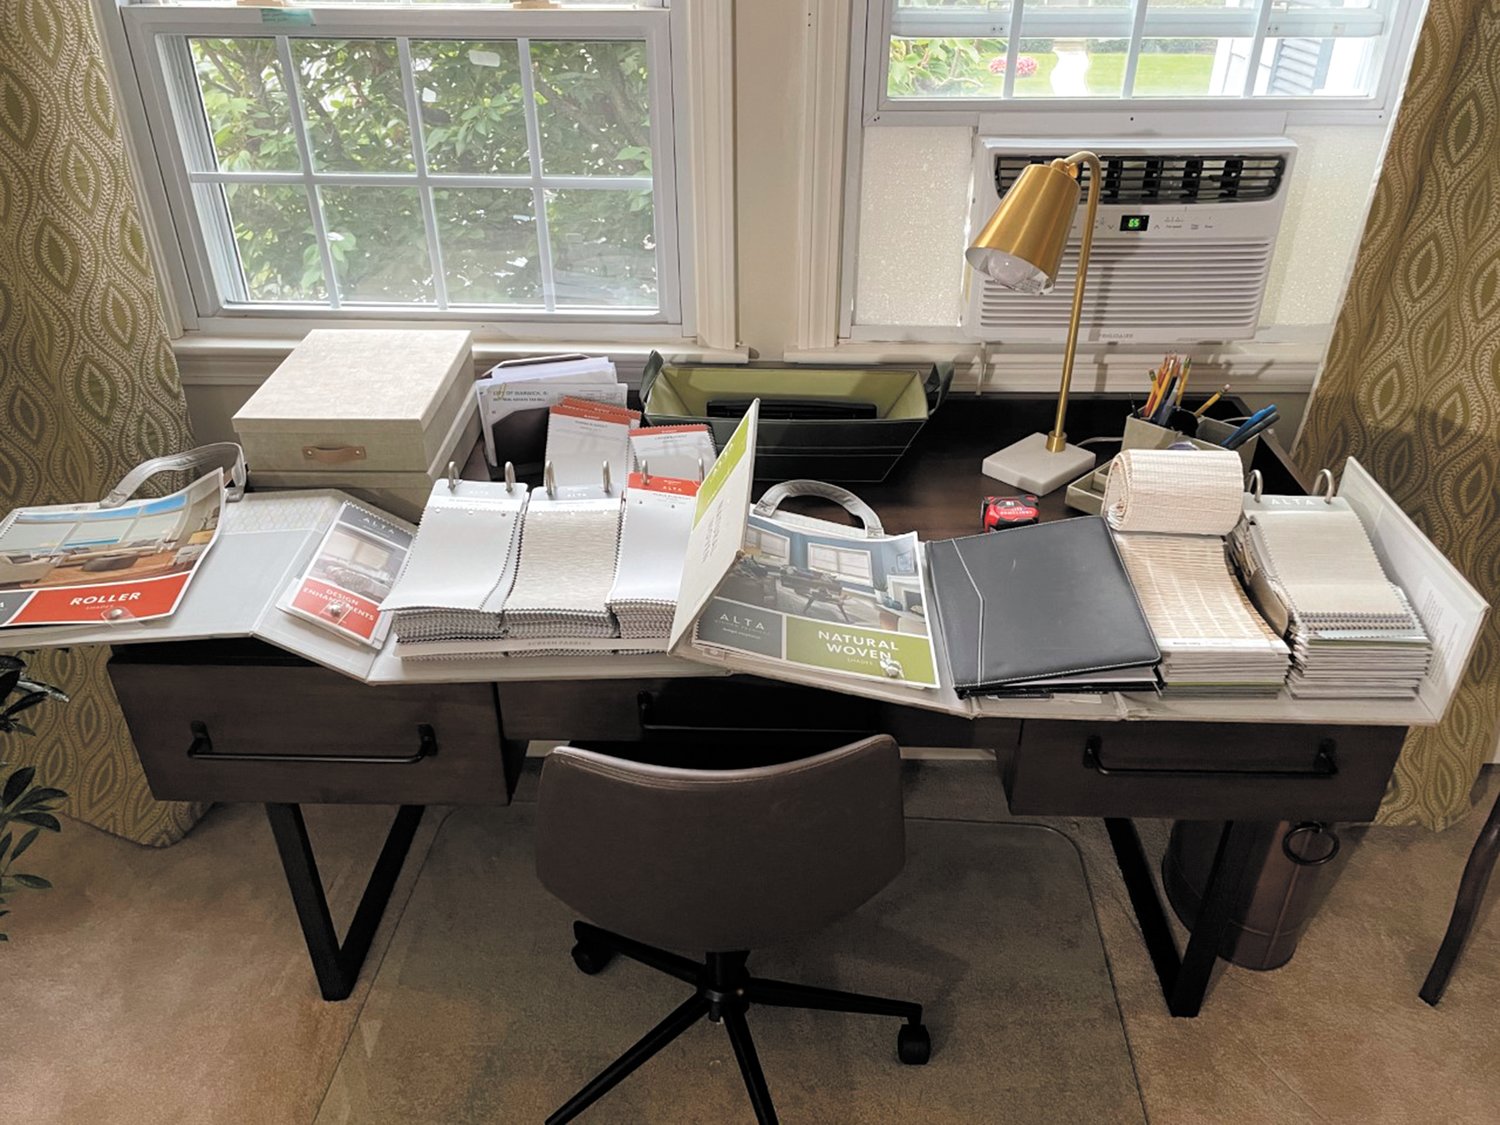 Piles of samples cover the desk of Warwick resident Jennifer Jones as she checks out the many shade options from Harris Blinds & Shutters. This is her free consultation!